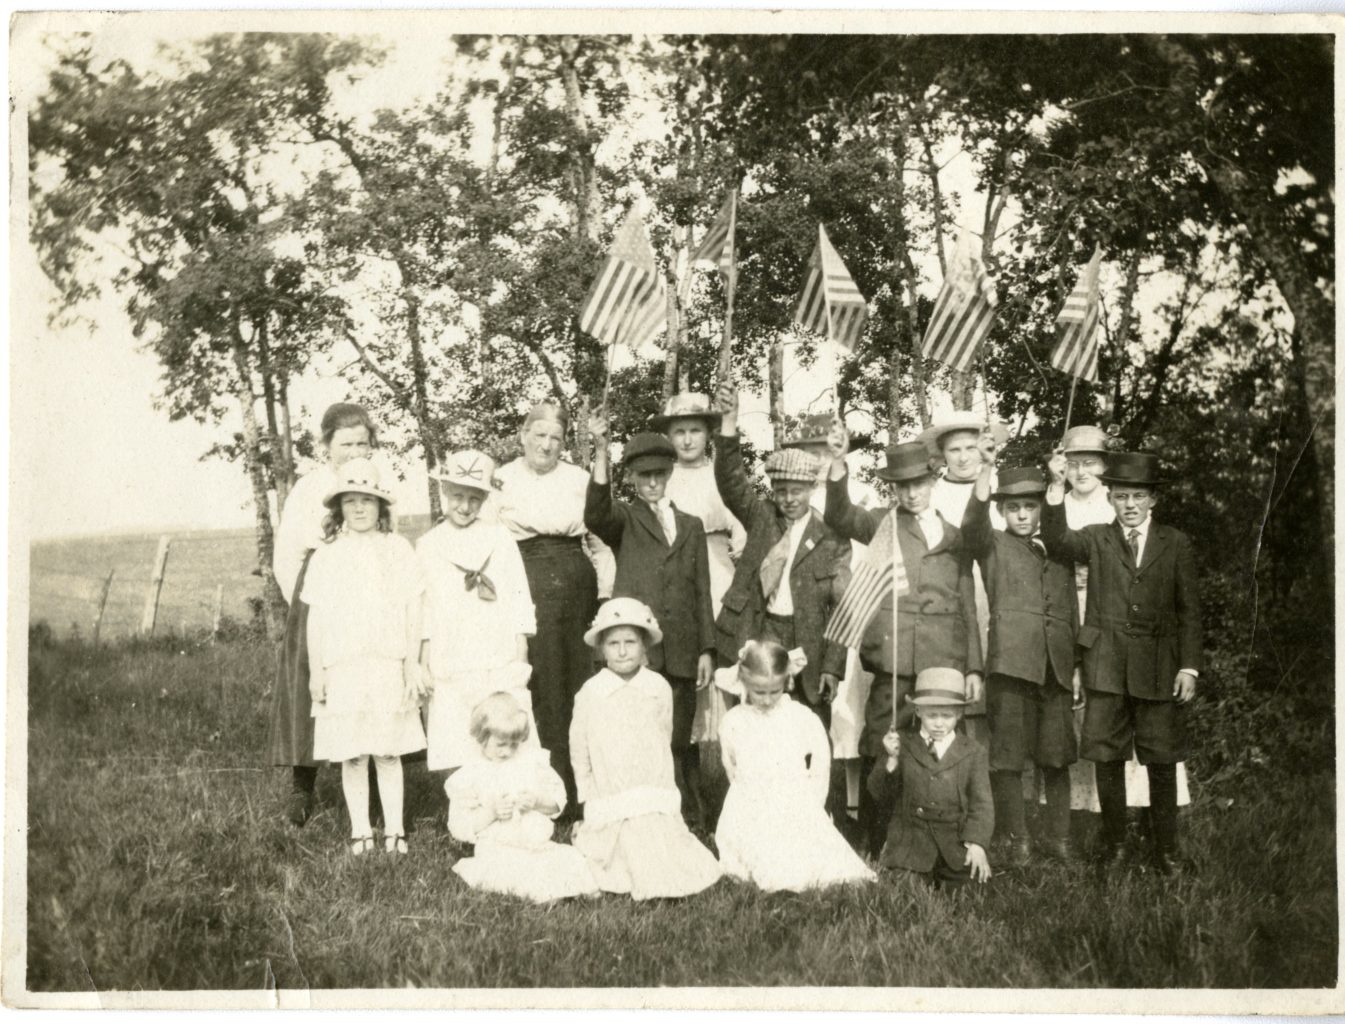 Group of children and one adult pose for a photo with American flags.